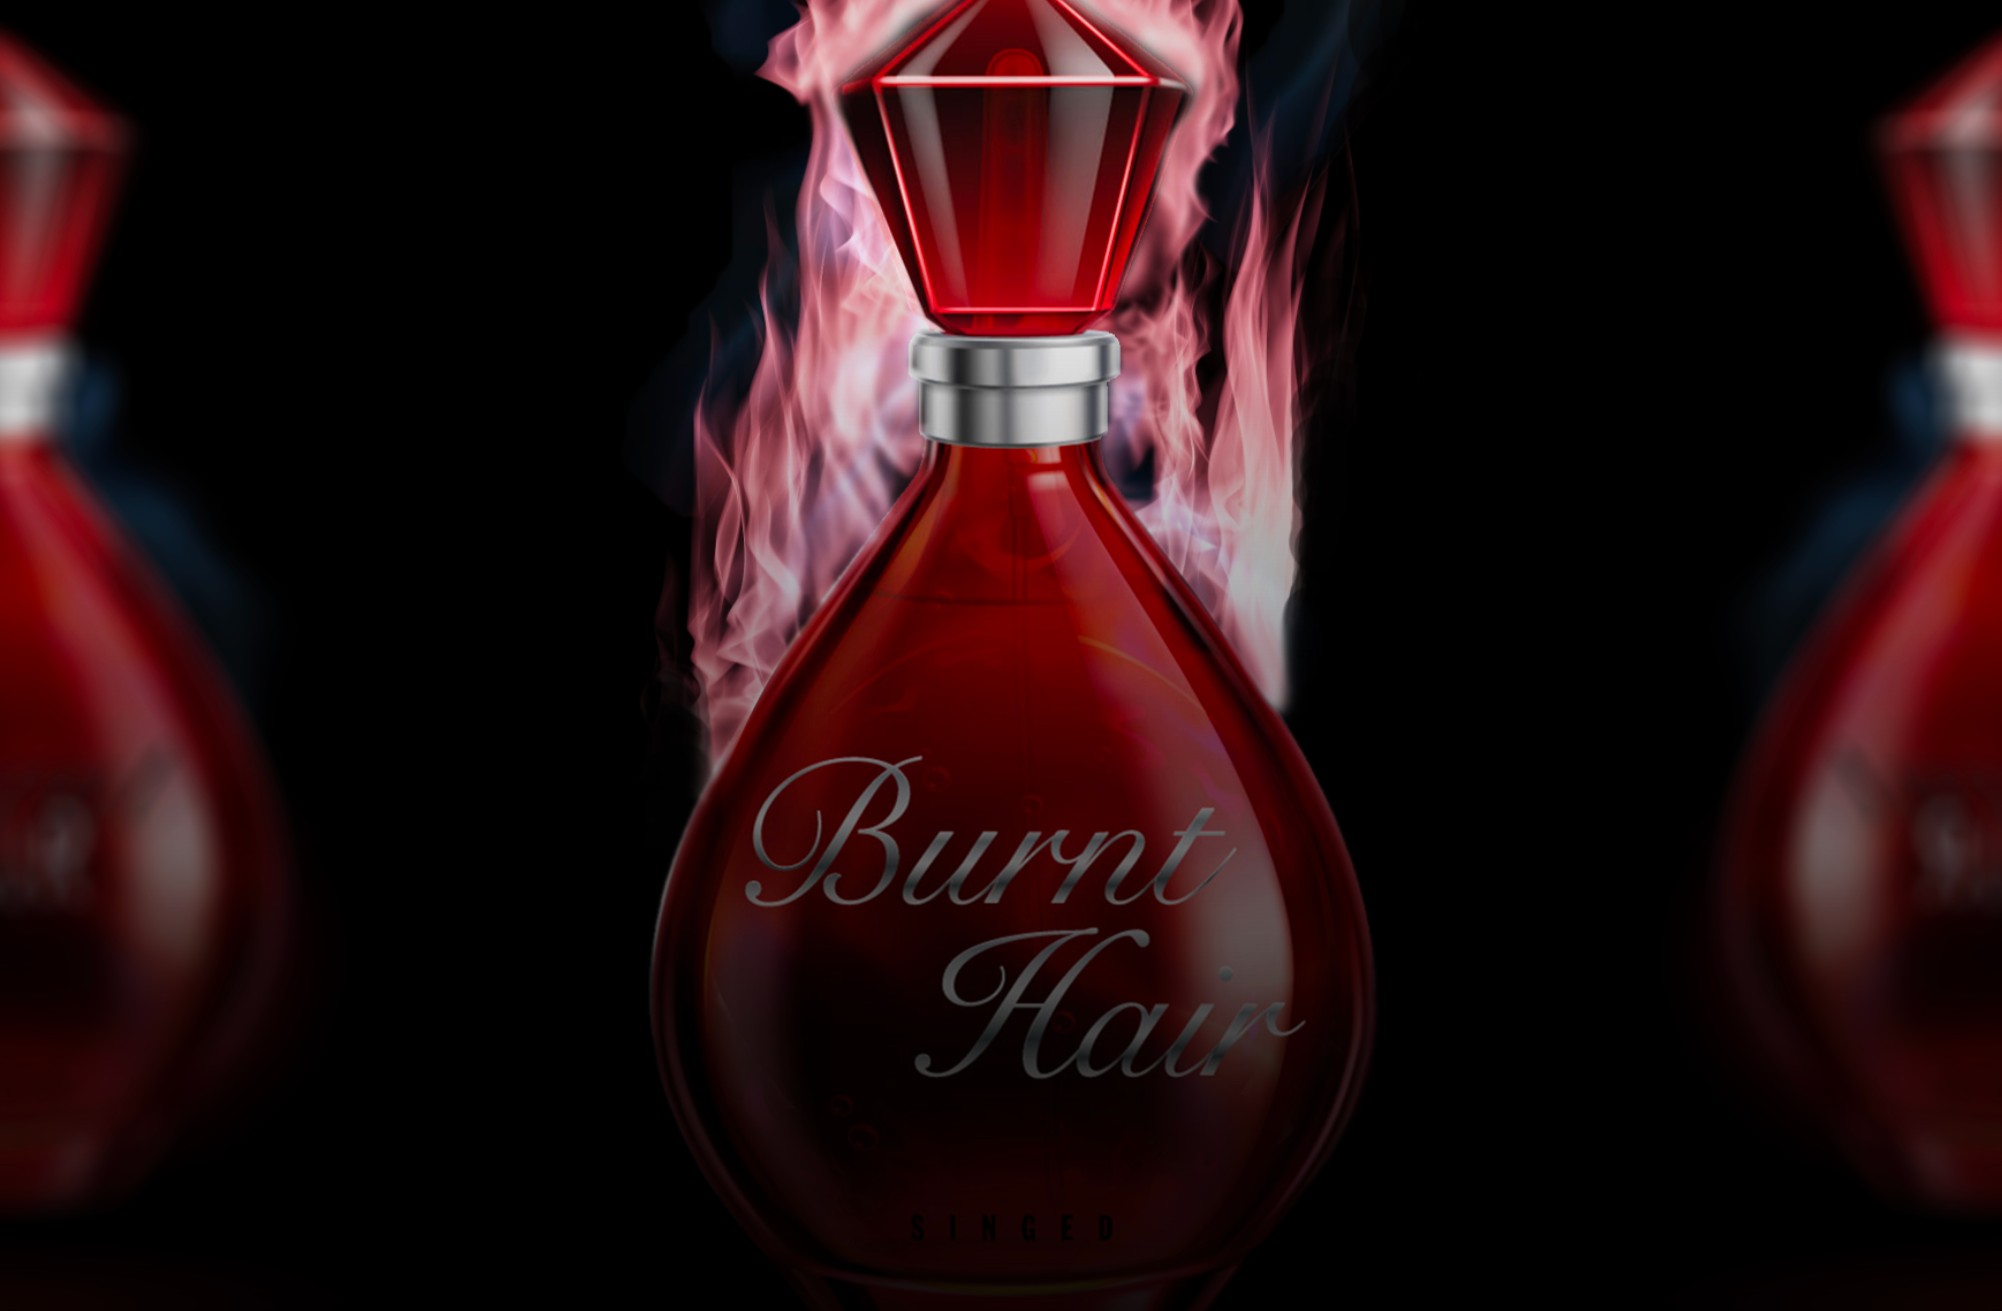 The Boring Company 'Burnt Hair' perfume sells for 10x the price on eBay